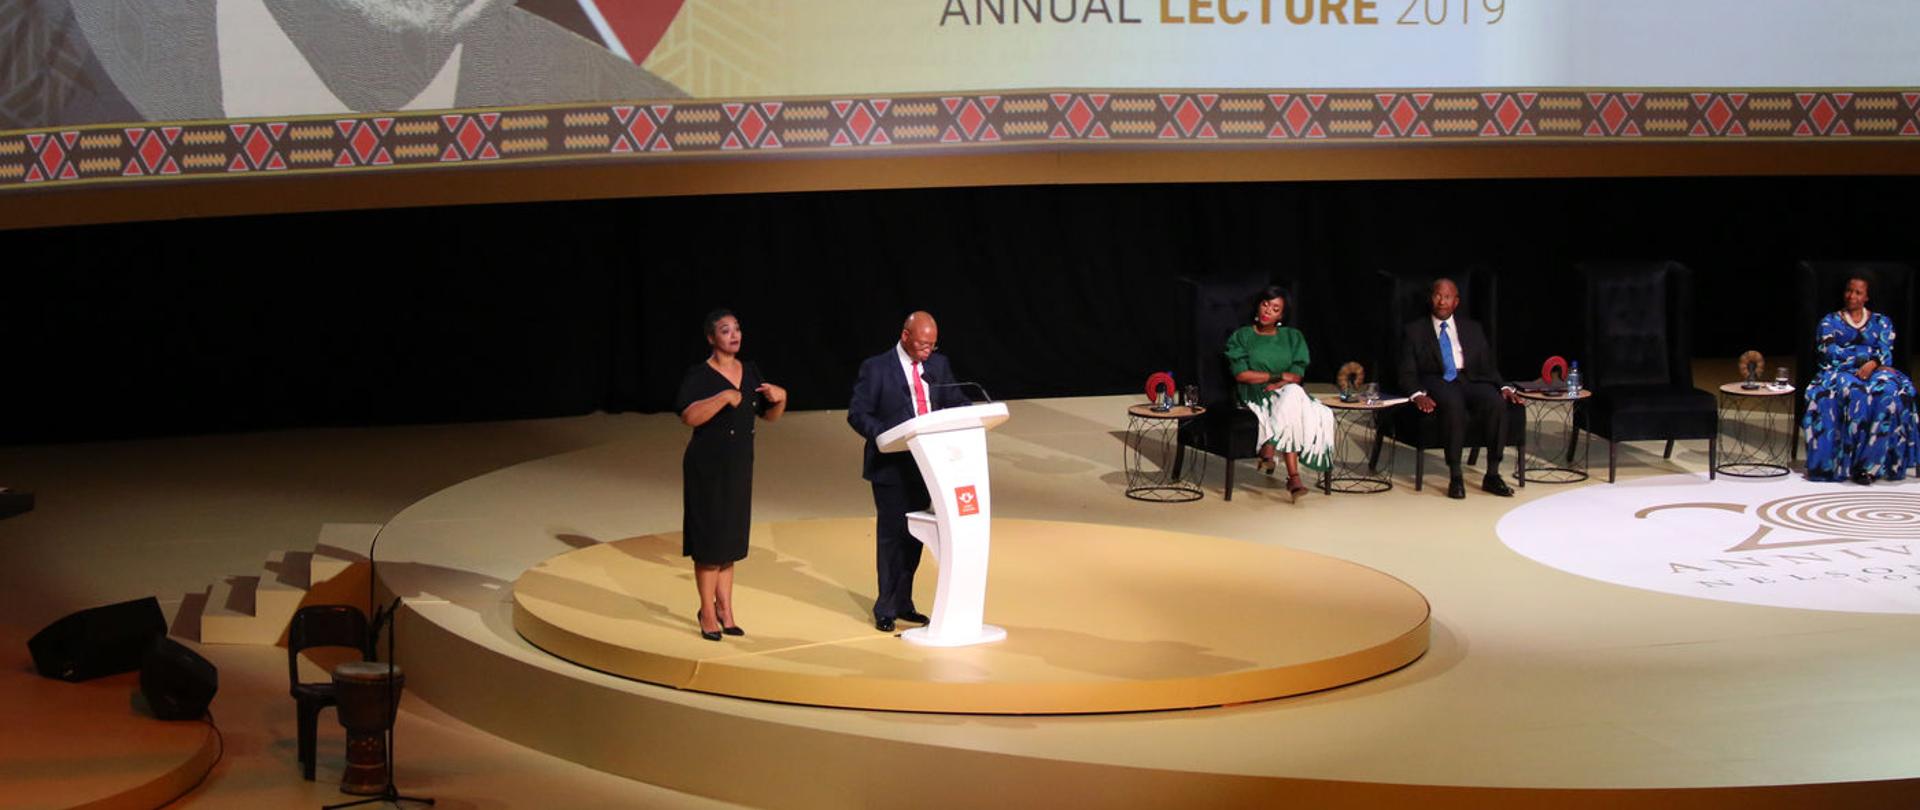 Ambassador Andrzej Kanthak takes part in the annual lecture at the Nelson Mandela Foundation